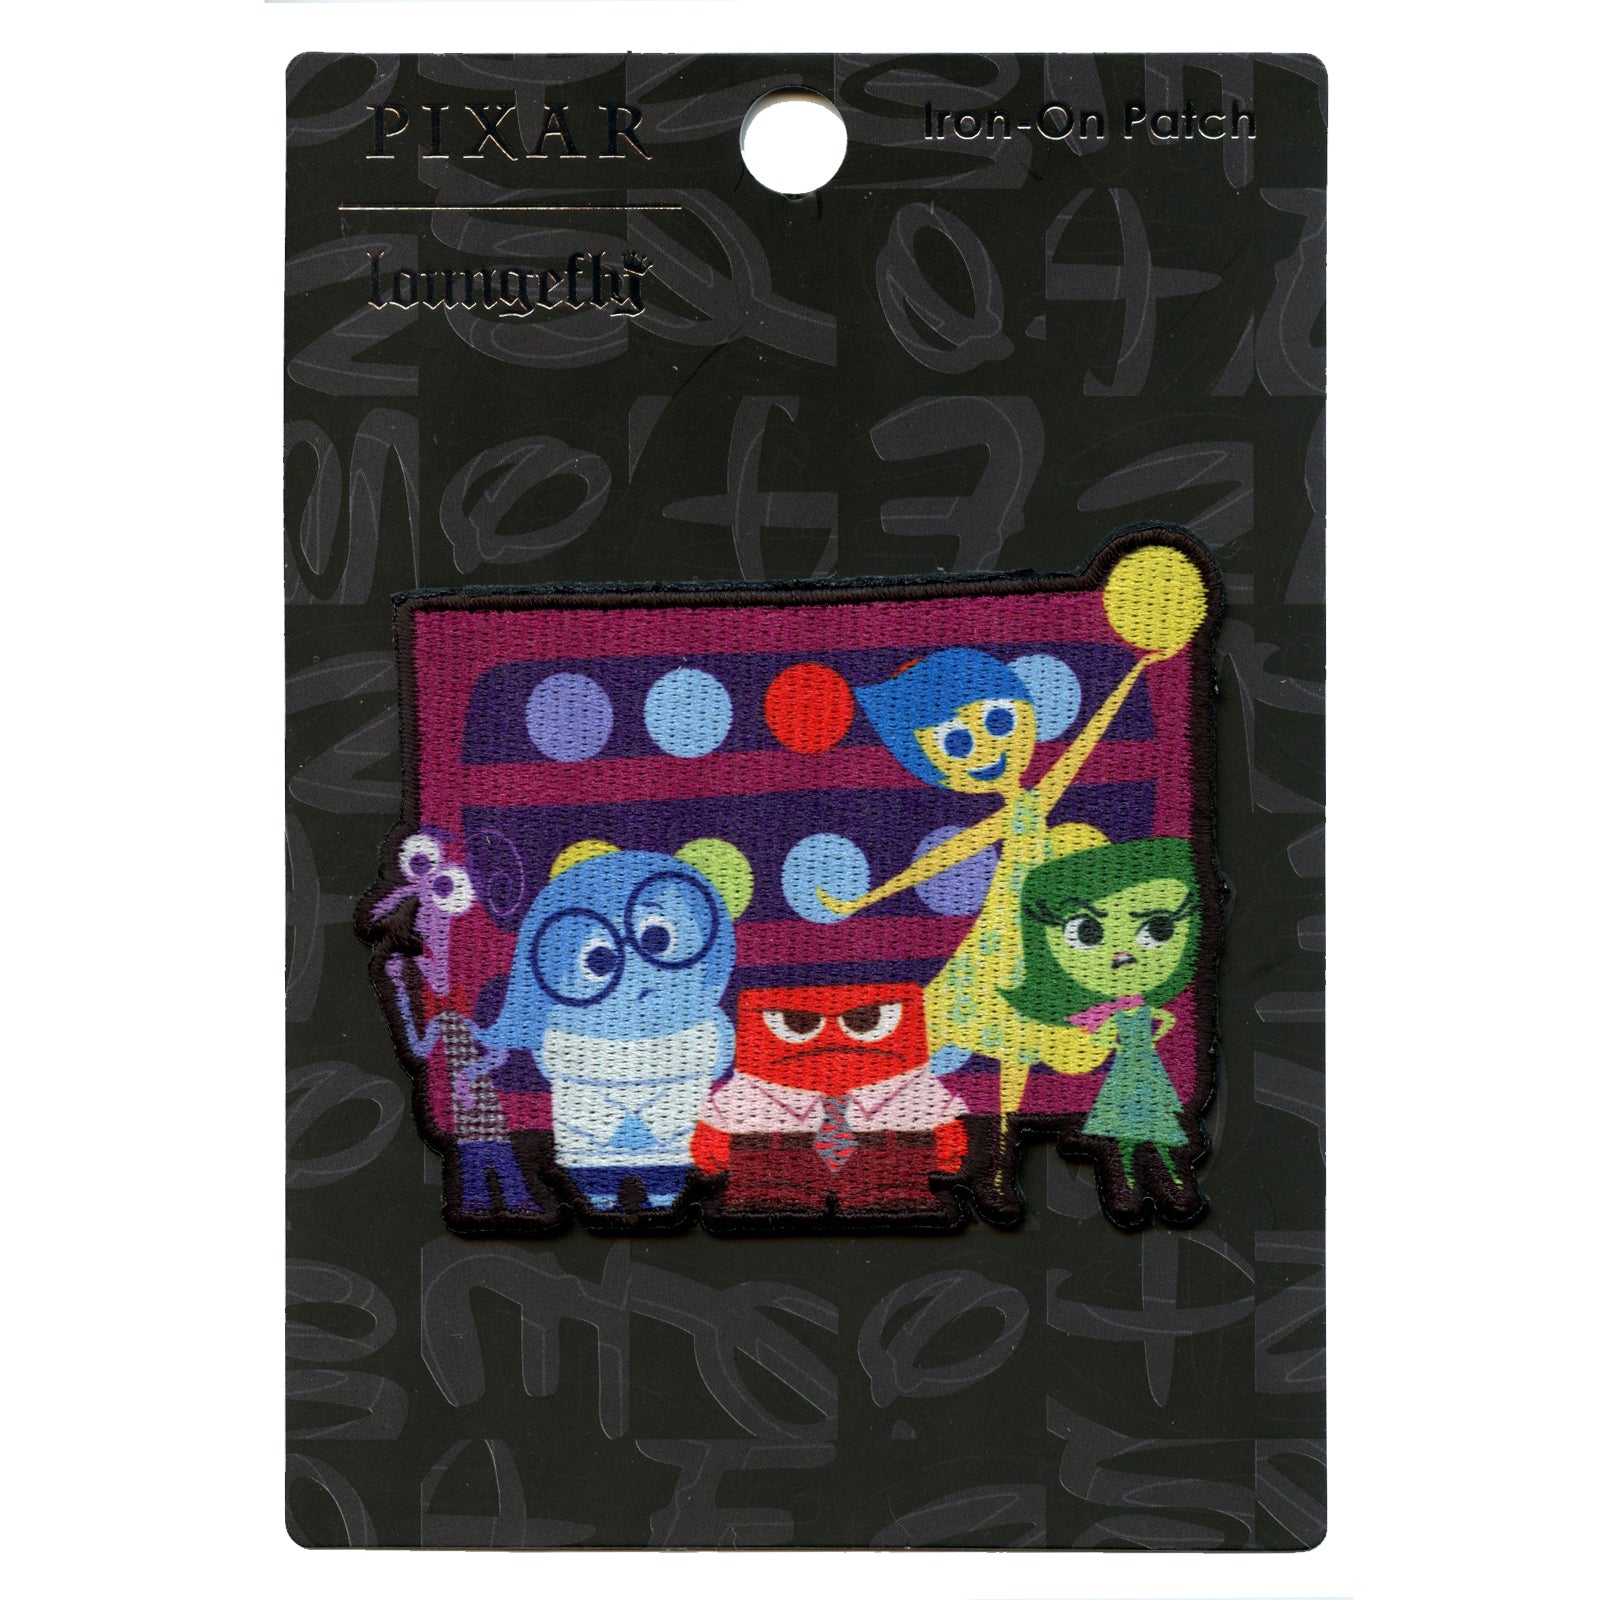 Official Disney's Inside Out Character Group Embroidered Iron On Applique Patch 